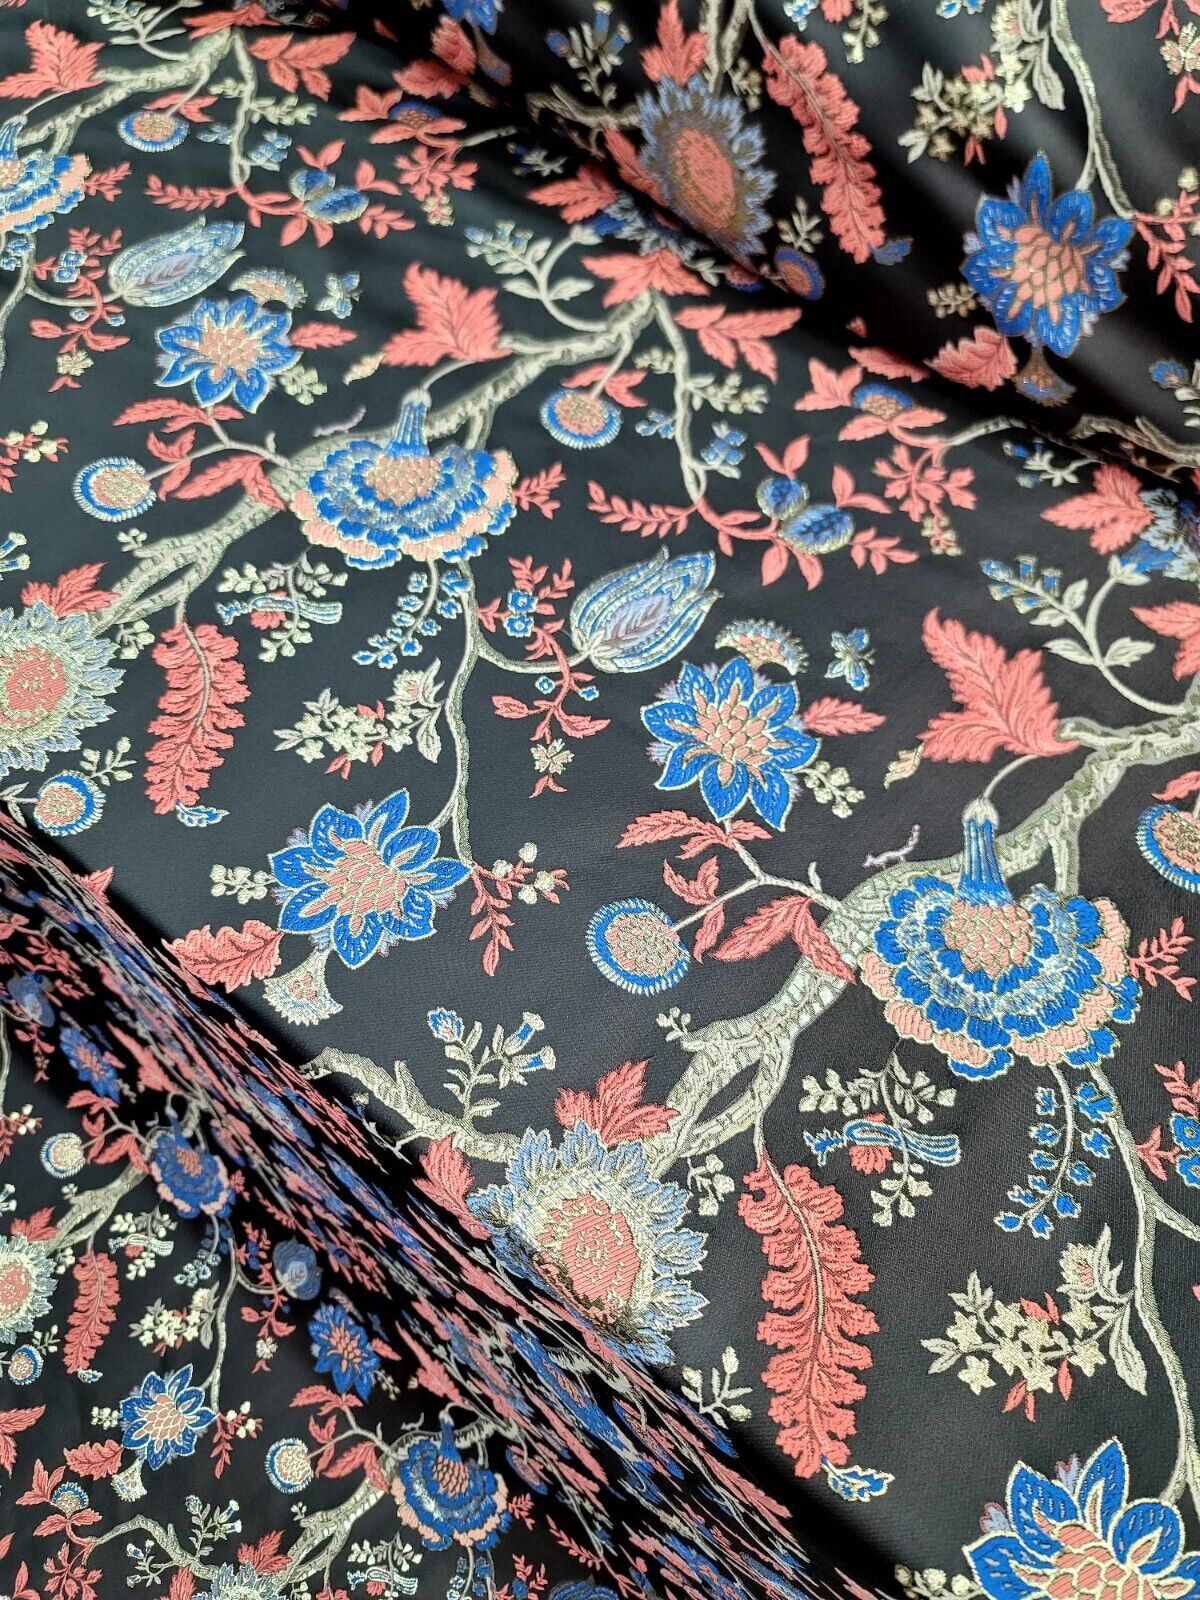 Coral Blue Floral Damask Jacquard Brocade Fabric By The Yard Thick Unique Design